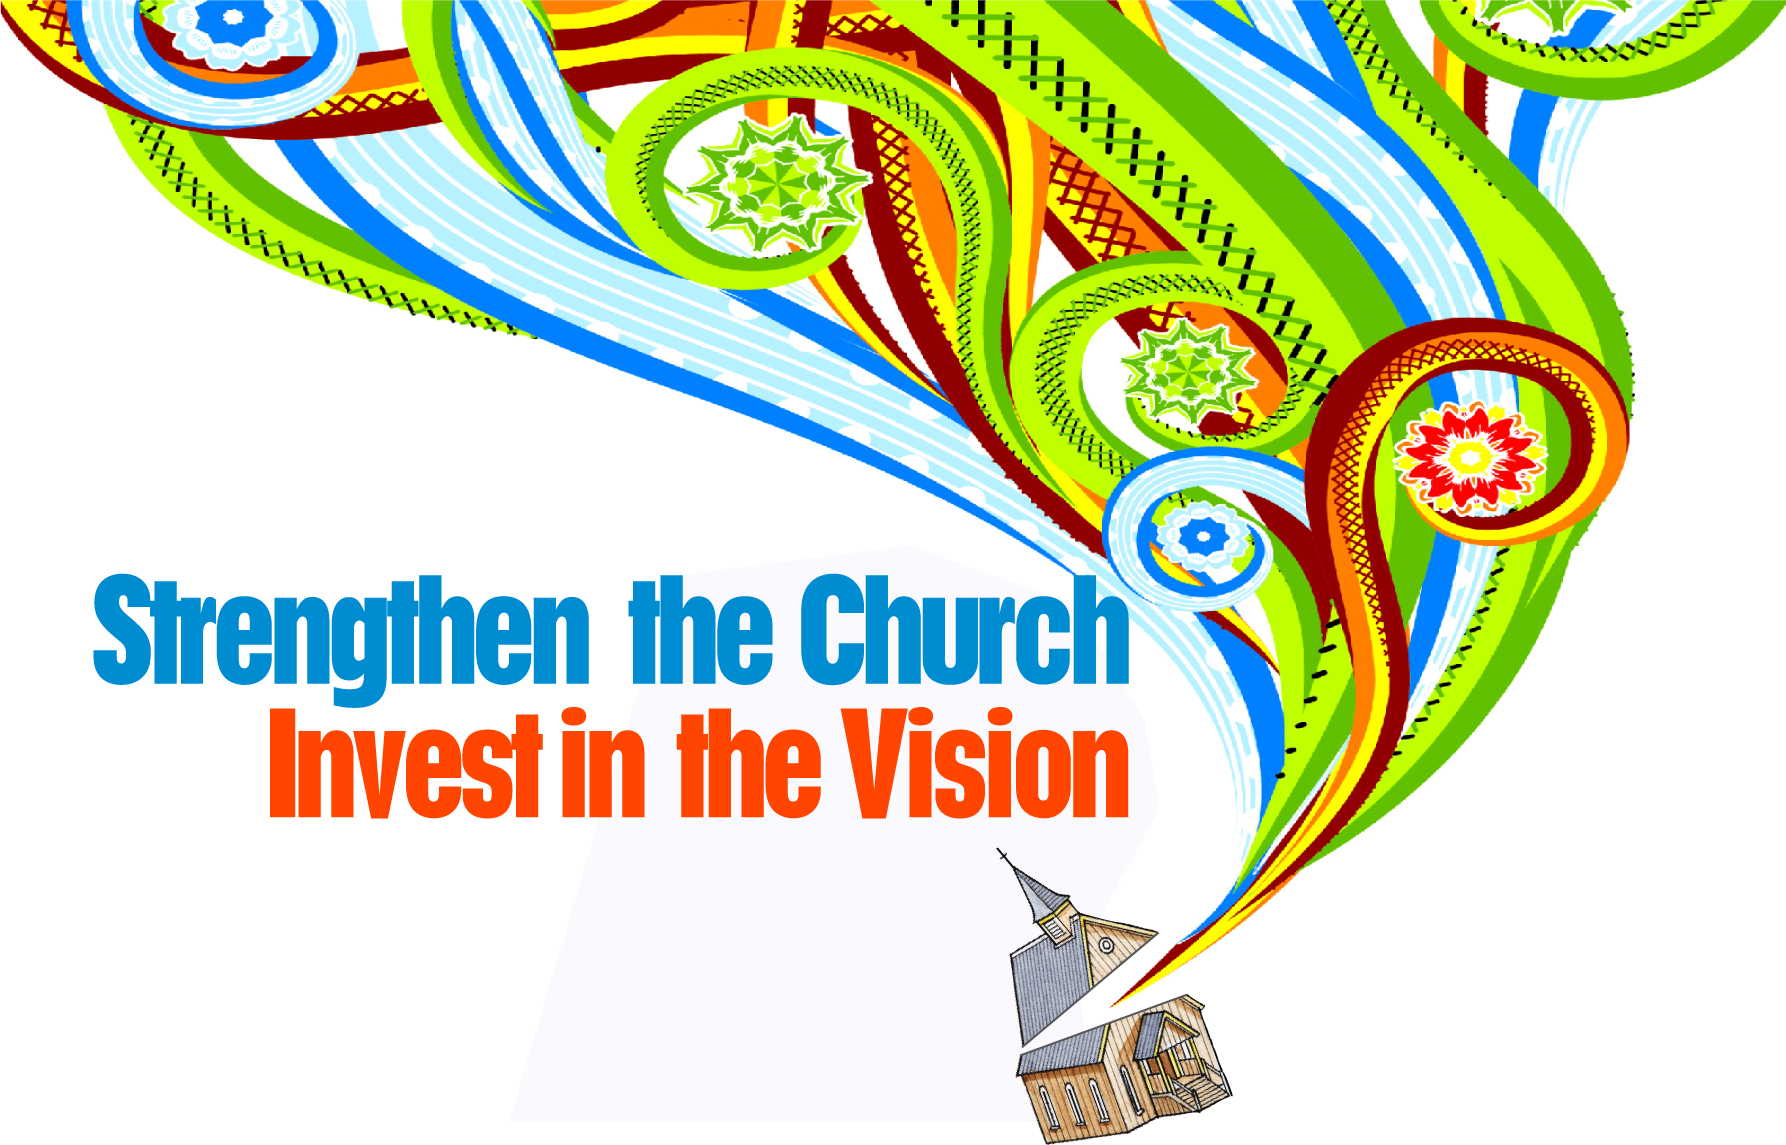 Strengthen the Church Special Offering: Invest in the Vision